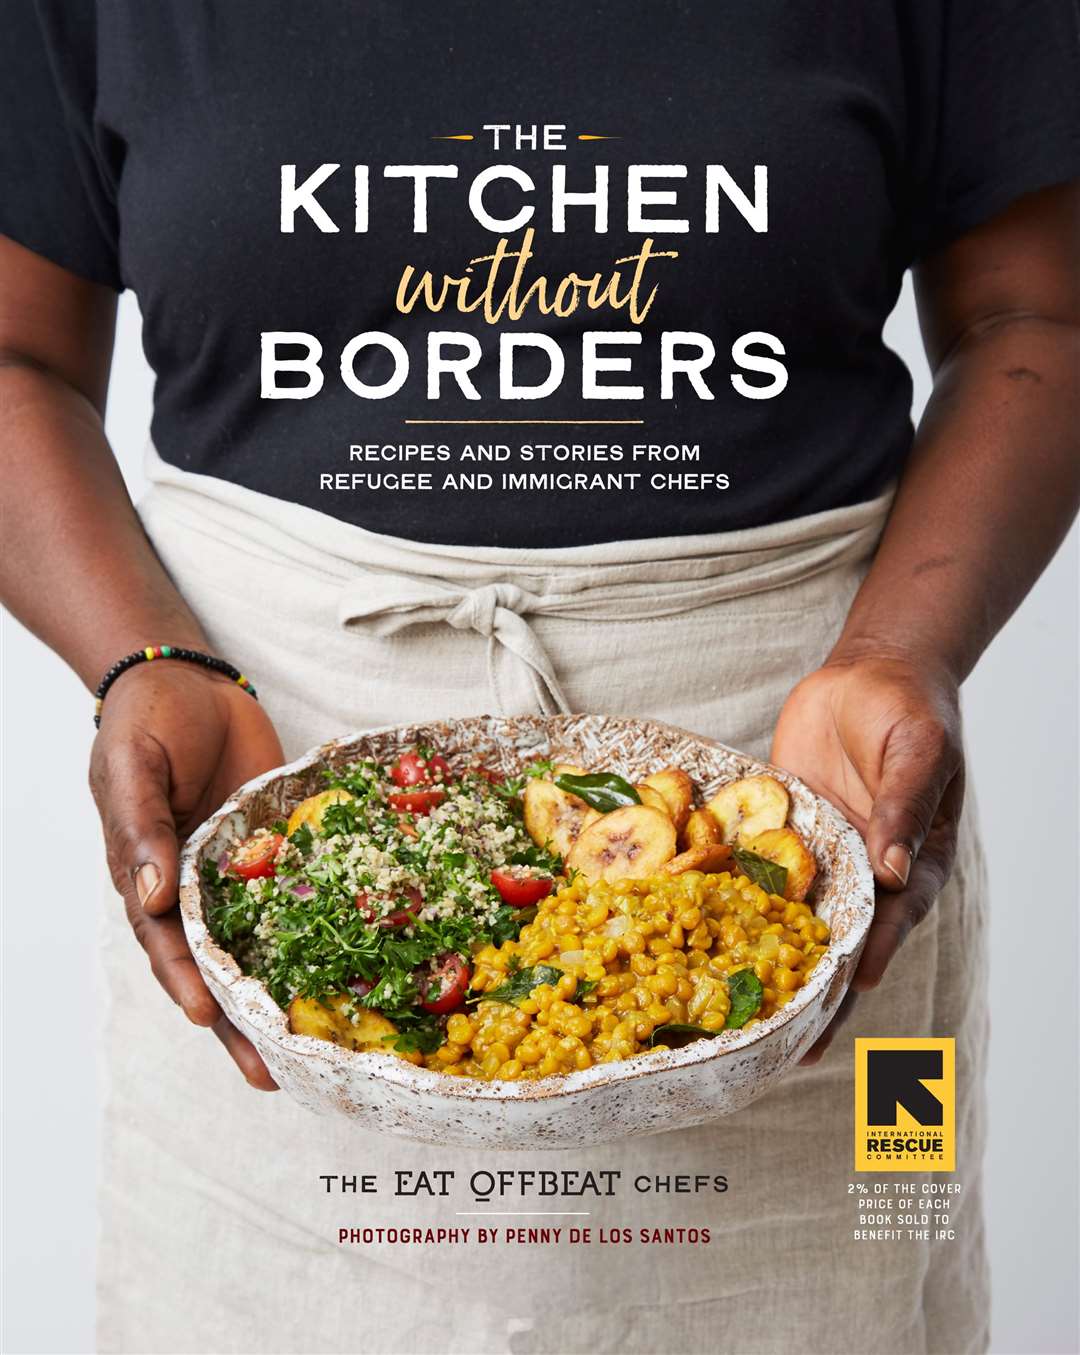 The Kitchen Without Borders: Recipes and Stories from Refugee and Immigrant Chefs by The Eat Offbeat Chefs. Picture: PA Photo/Penny De Los Santos.